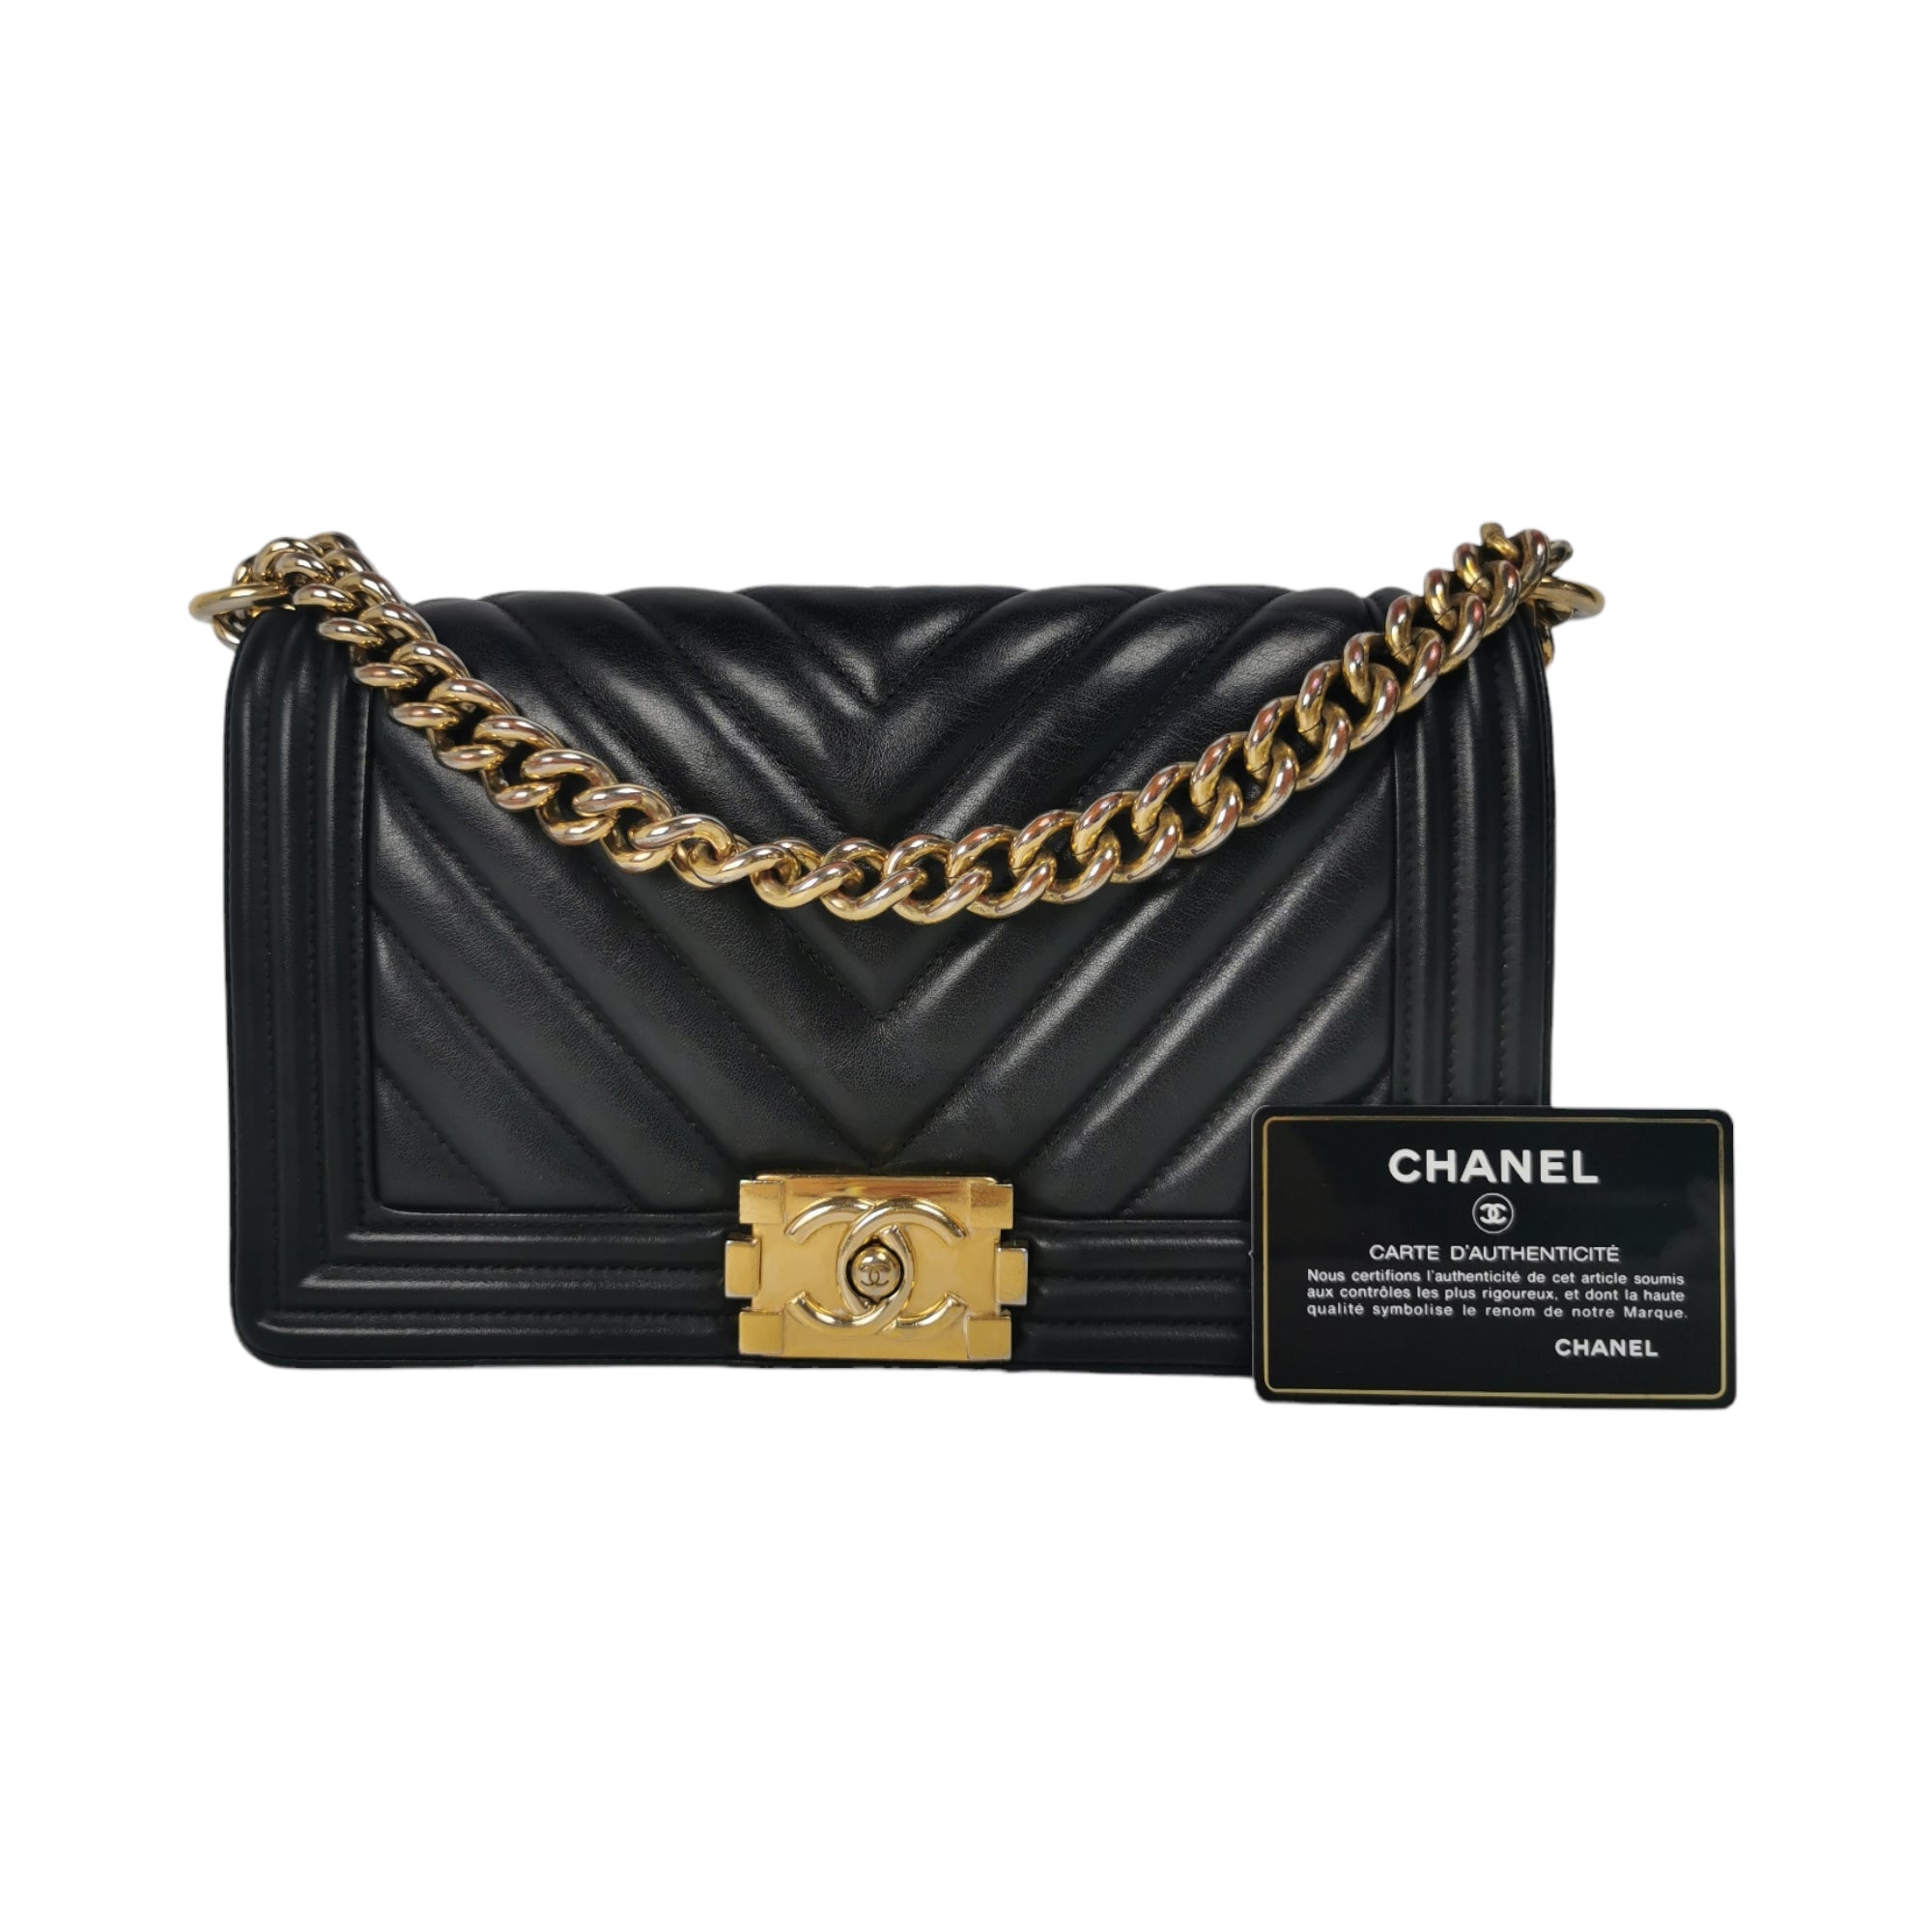 black and gold chanel purse authentic